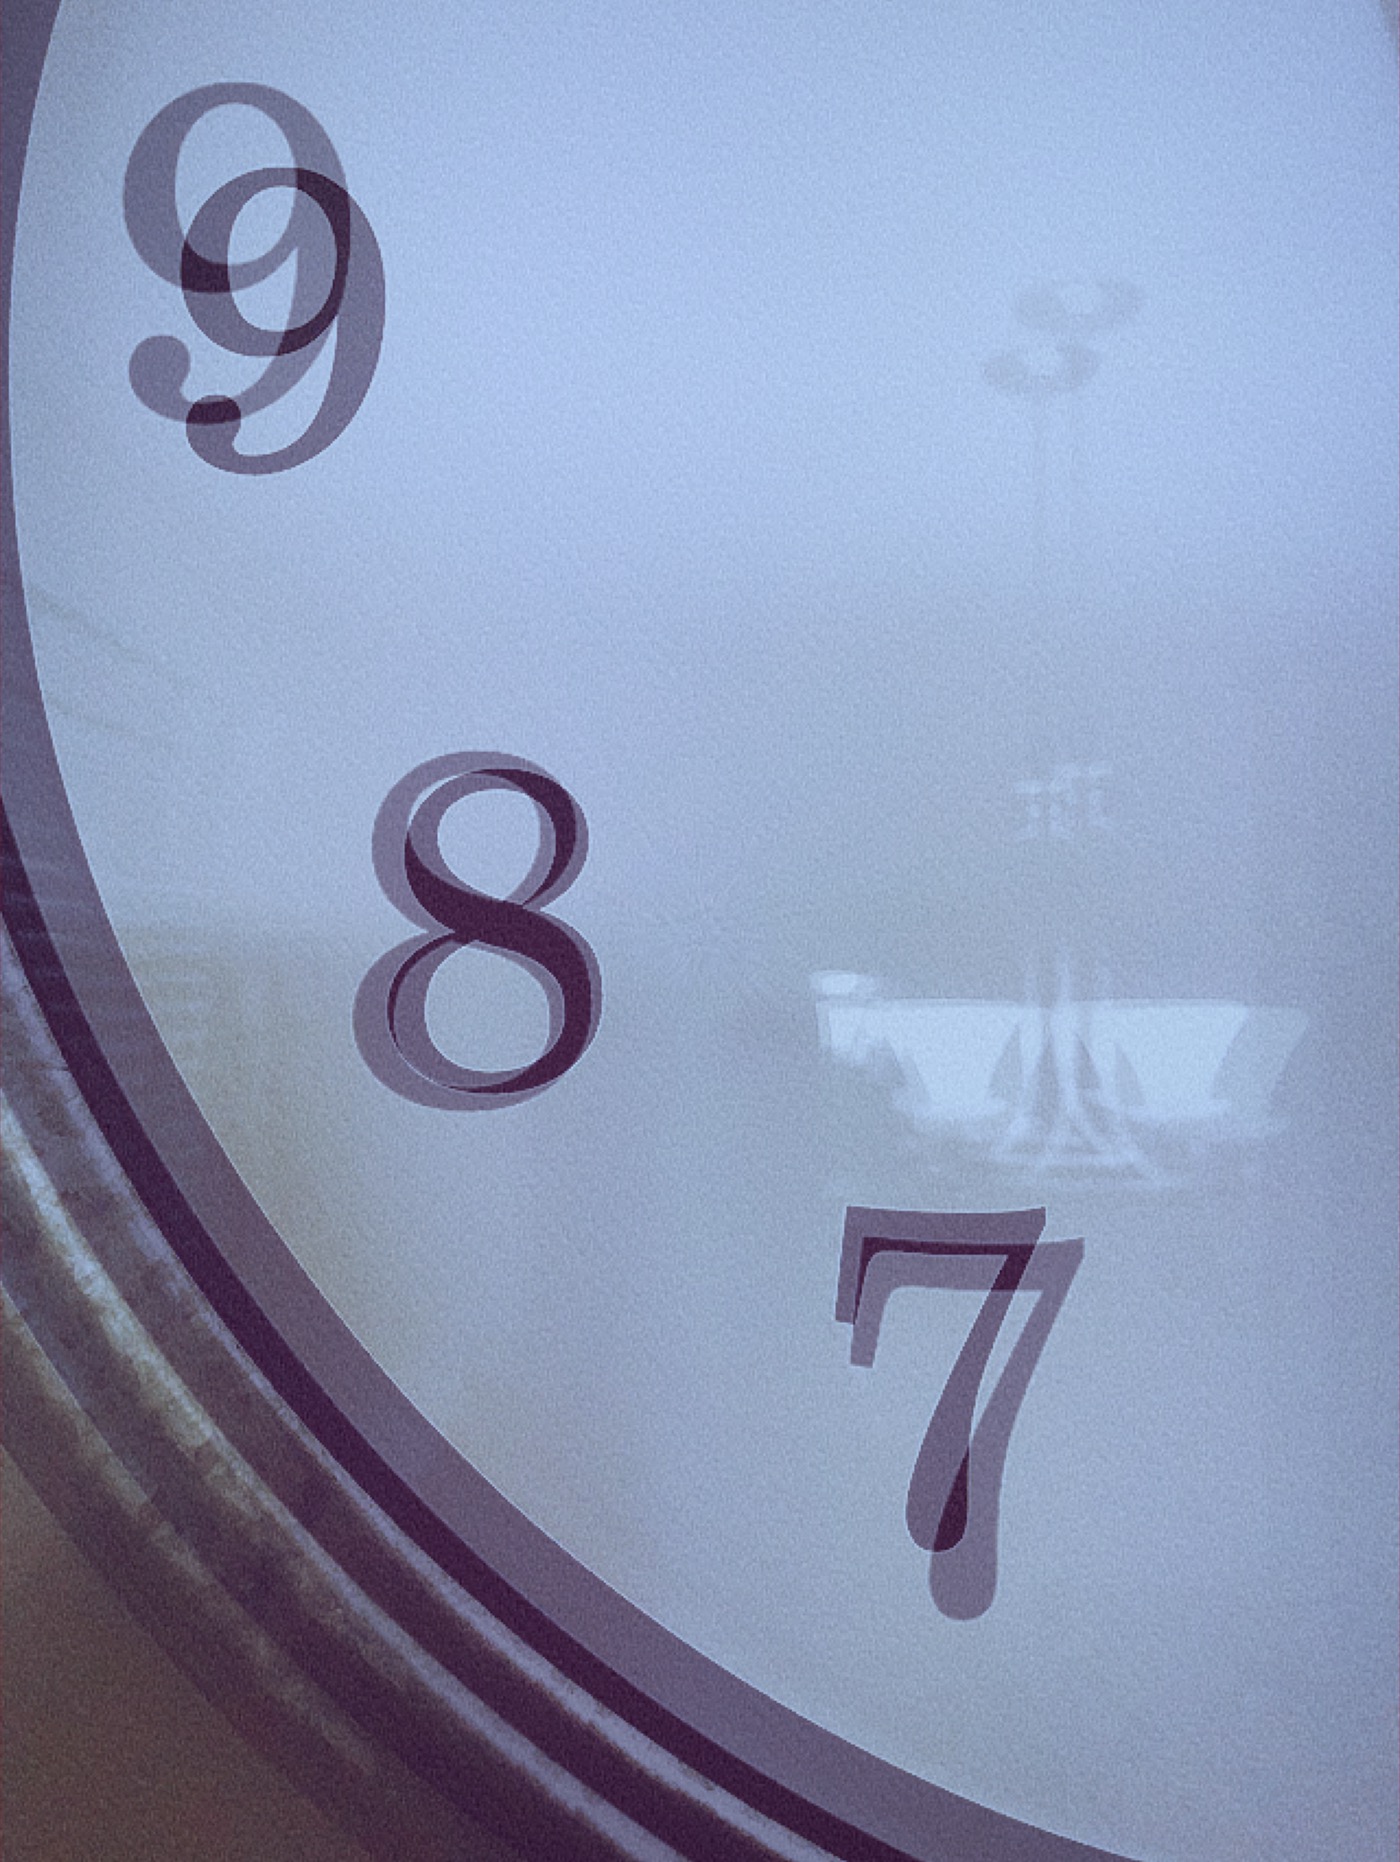 abstract time reflecting clock face Macro Photography glass